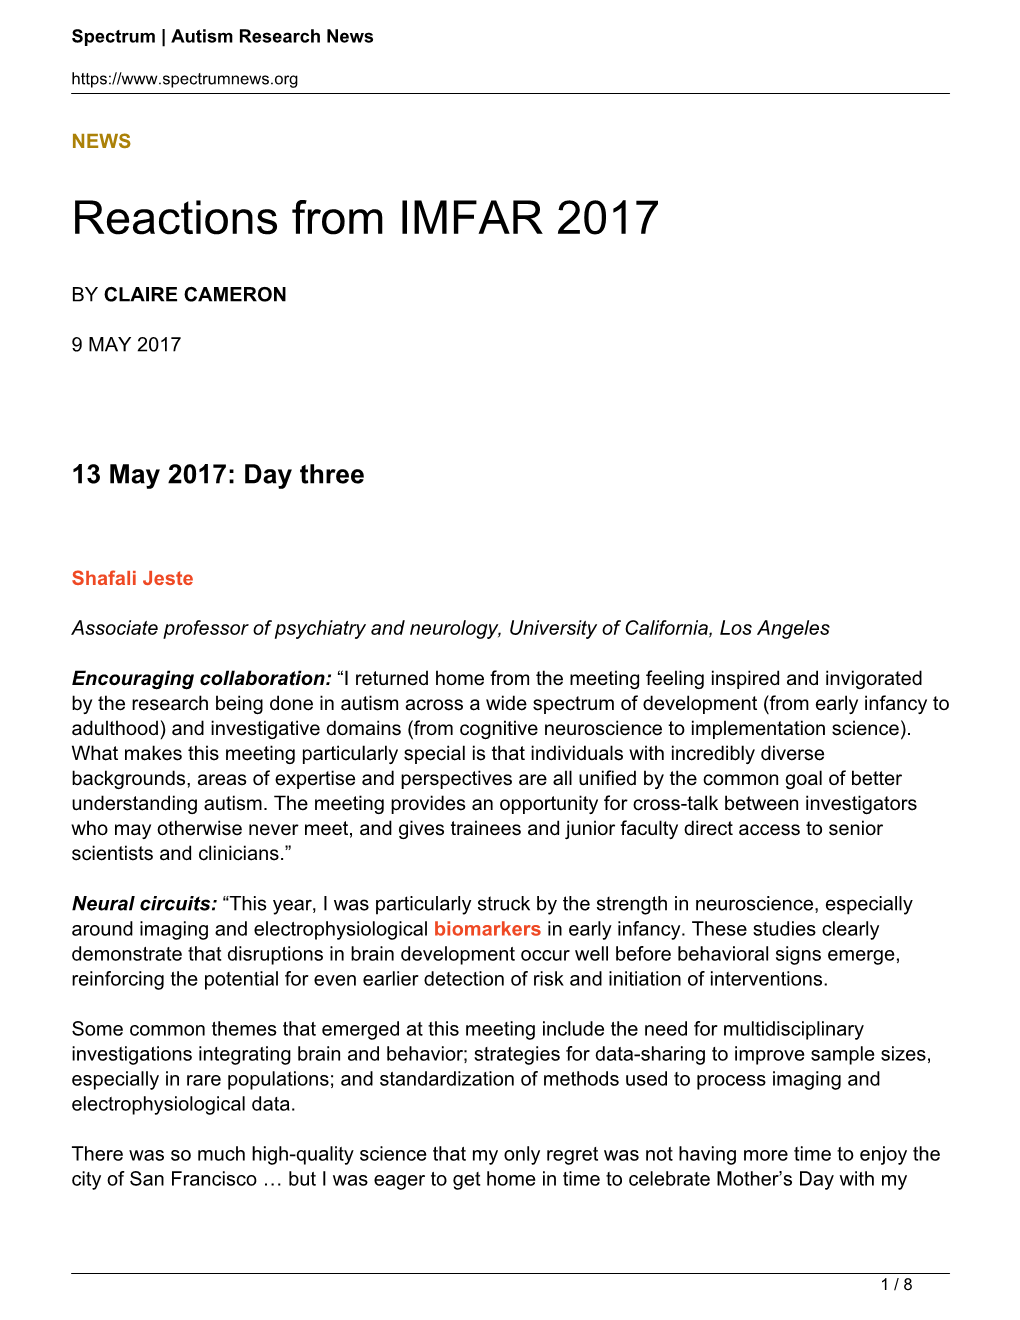 Reactions from IMFAR 2017